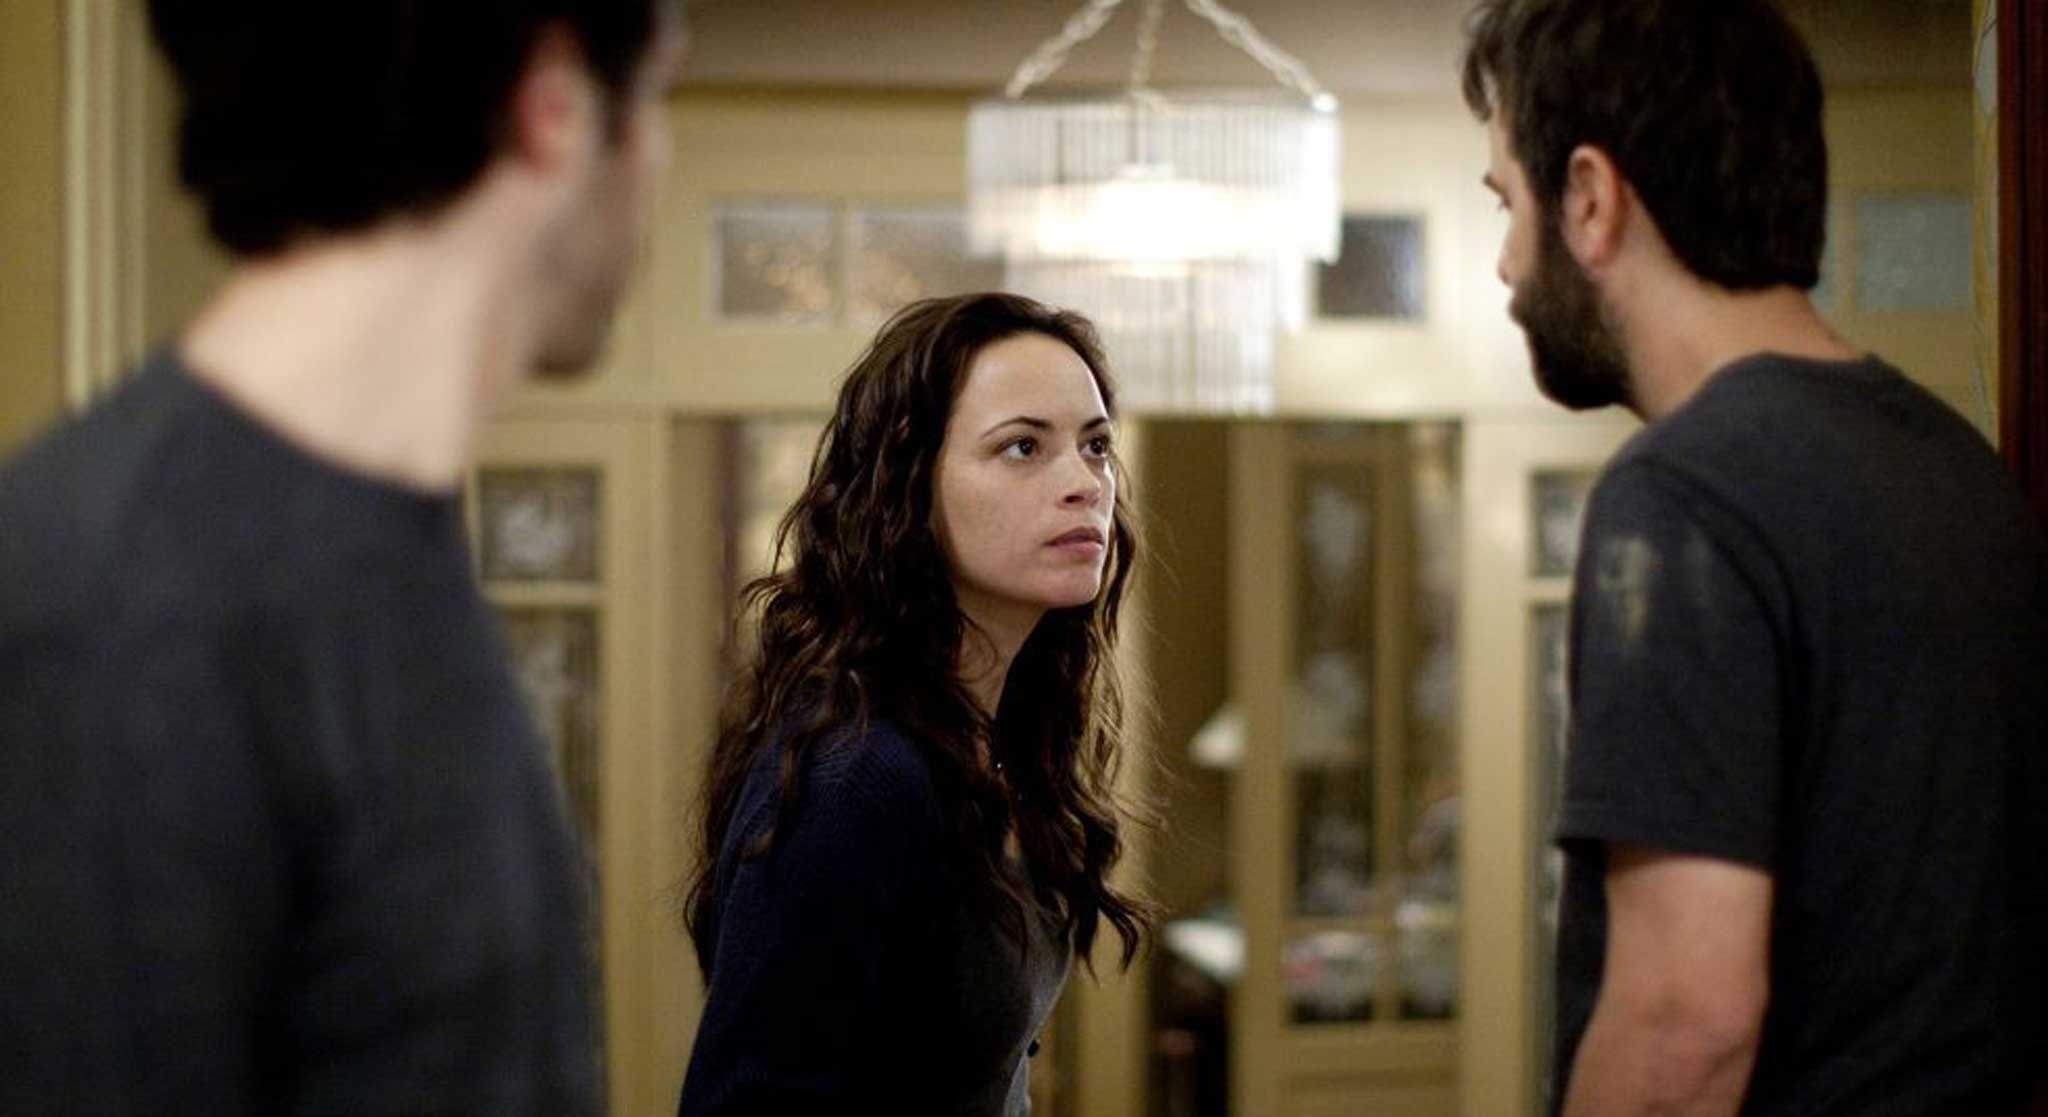 Relationship woes: Bérénice Bejo stars in 'The Past'